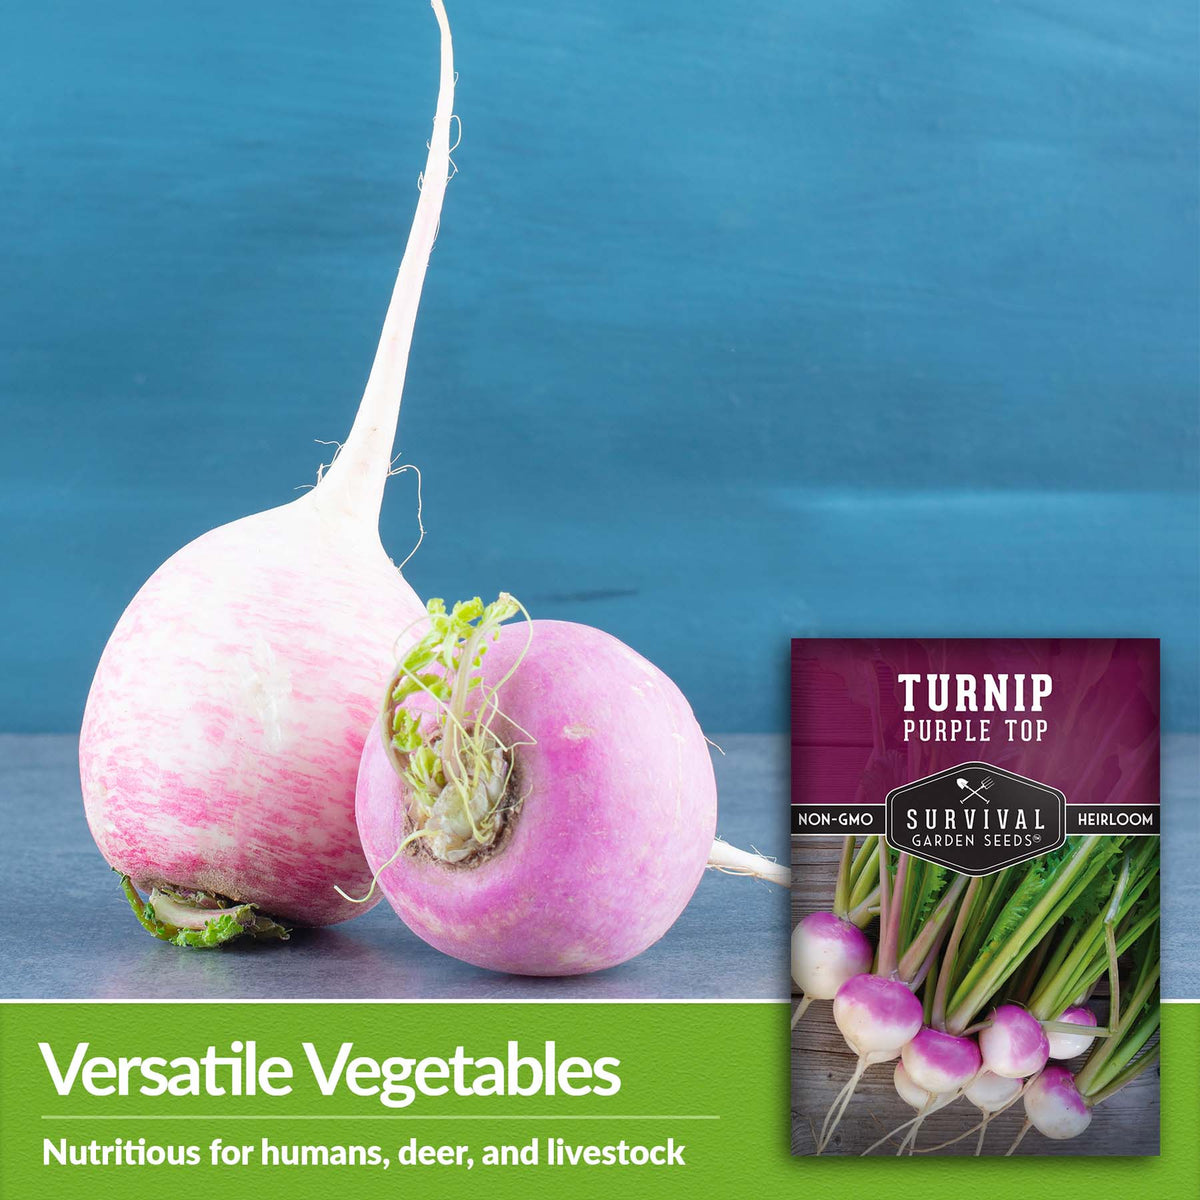 Purple top turnips are nutritious for humans, deer and livestock